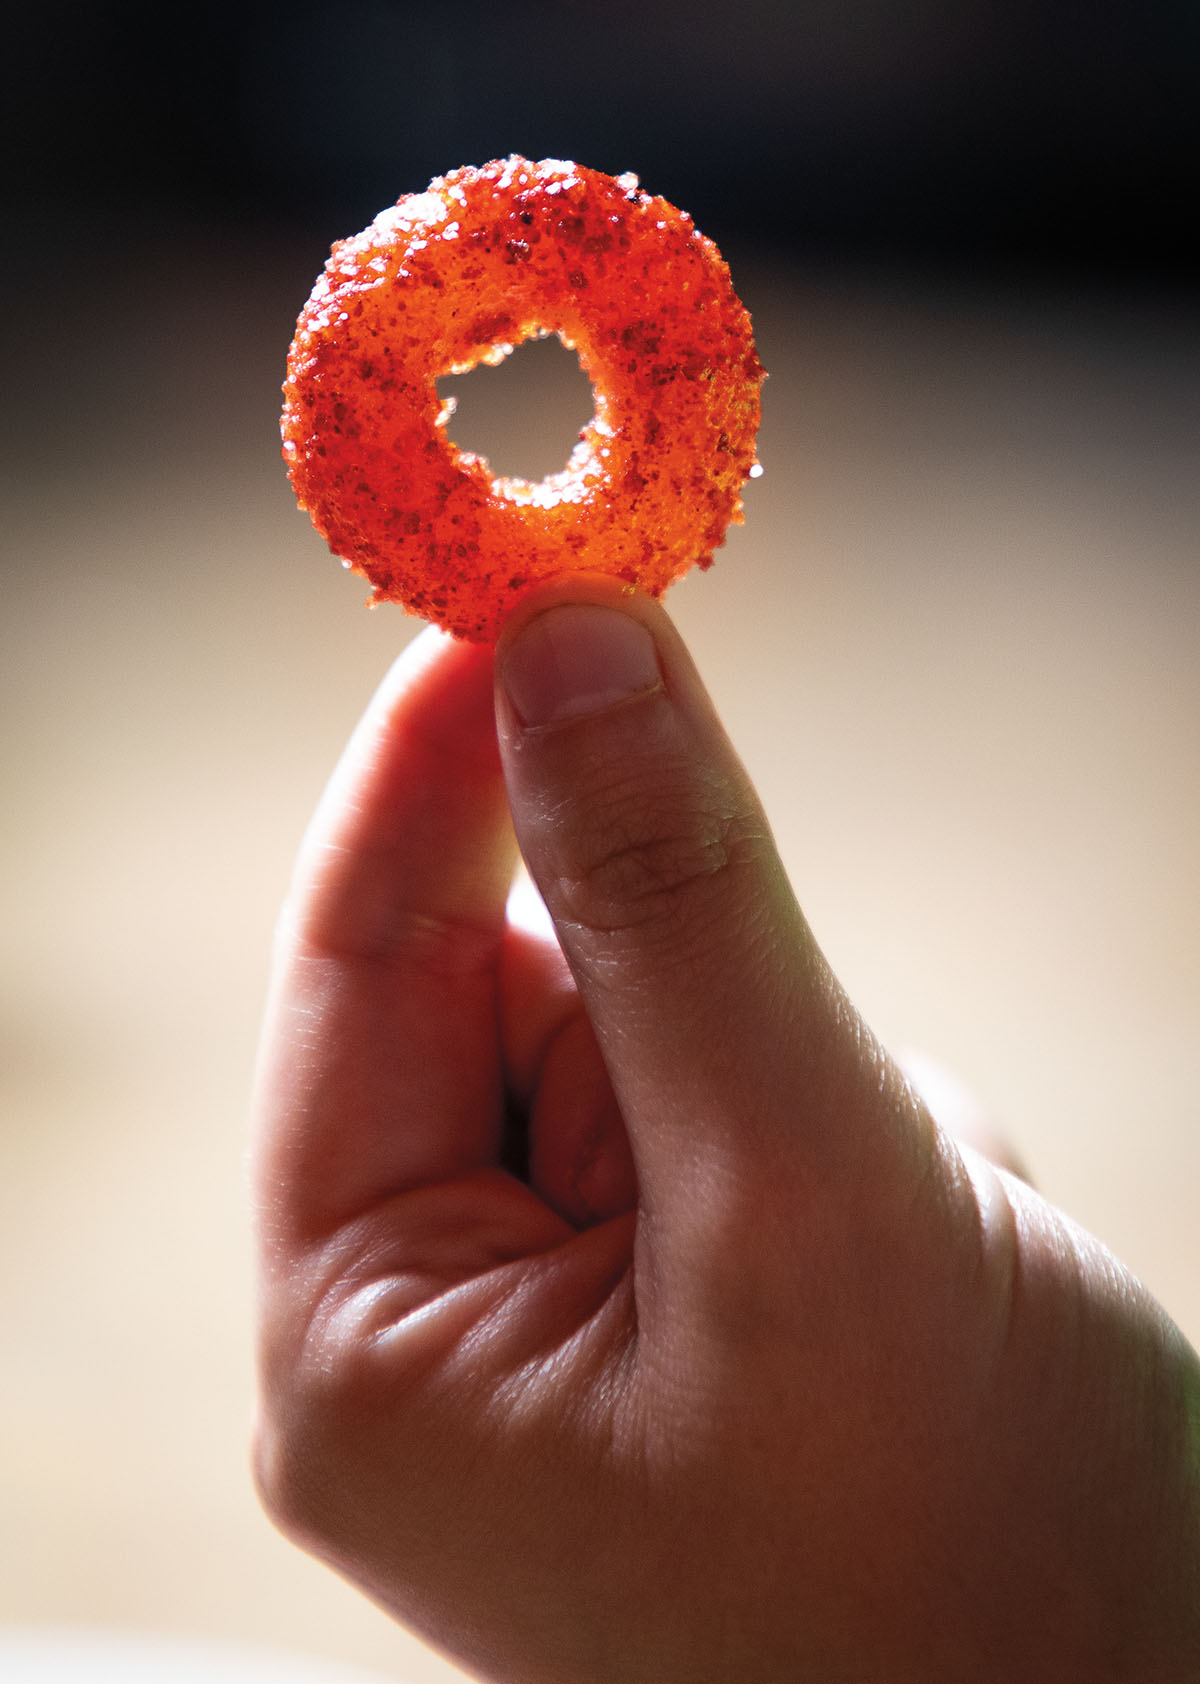 A hand holds up an orange-pink candy coated in bright red seasoning